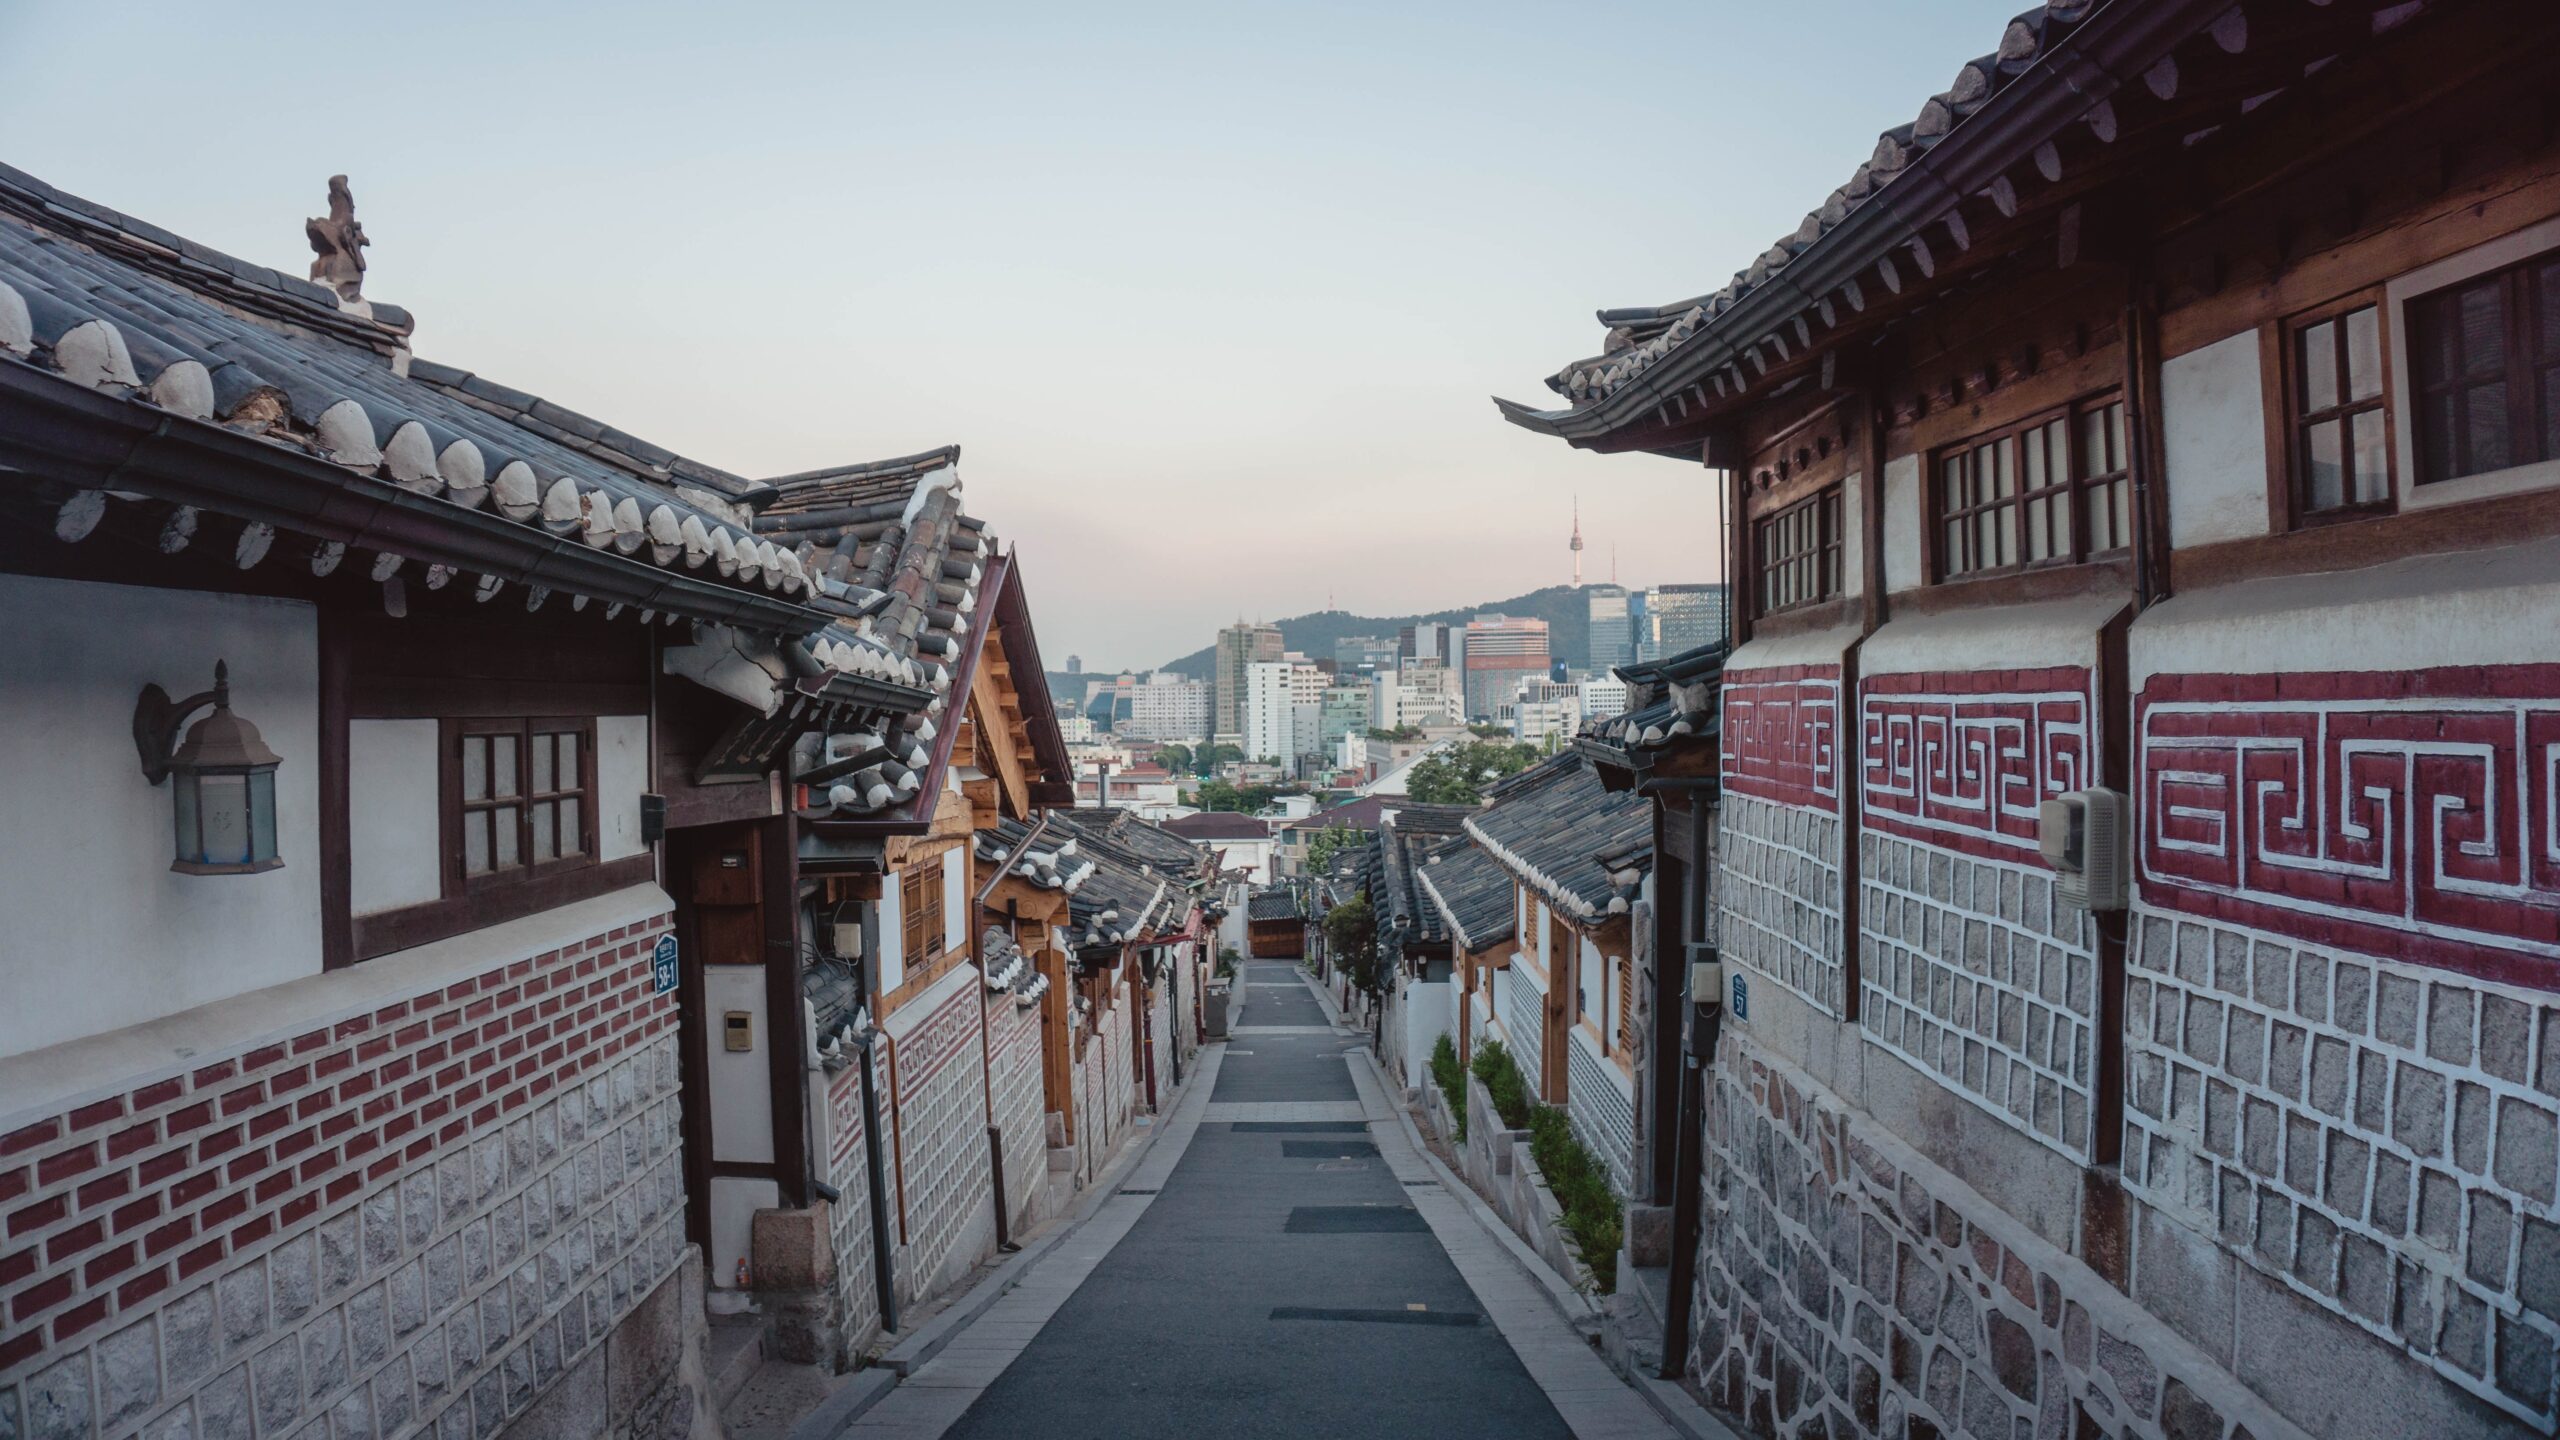 A narrow street lined with buildings in Seoul, South Korea, representing the past and future of the Korean Dream.